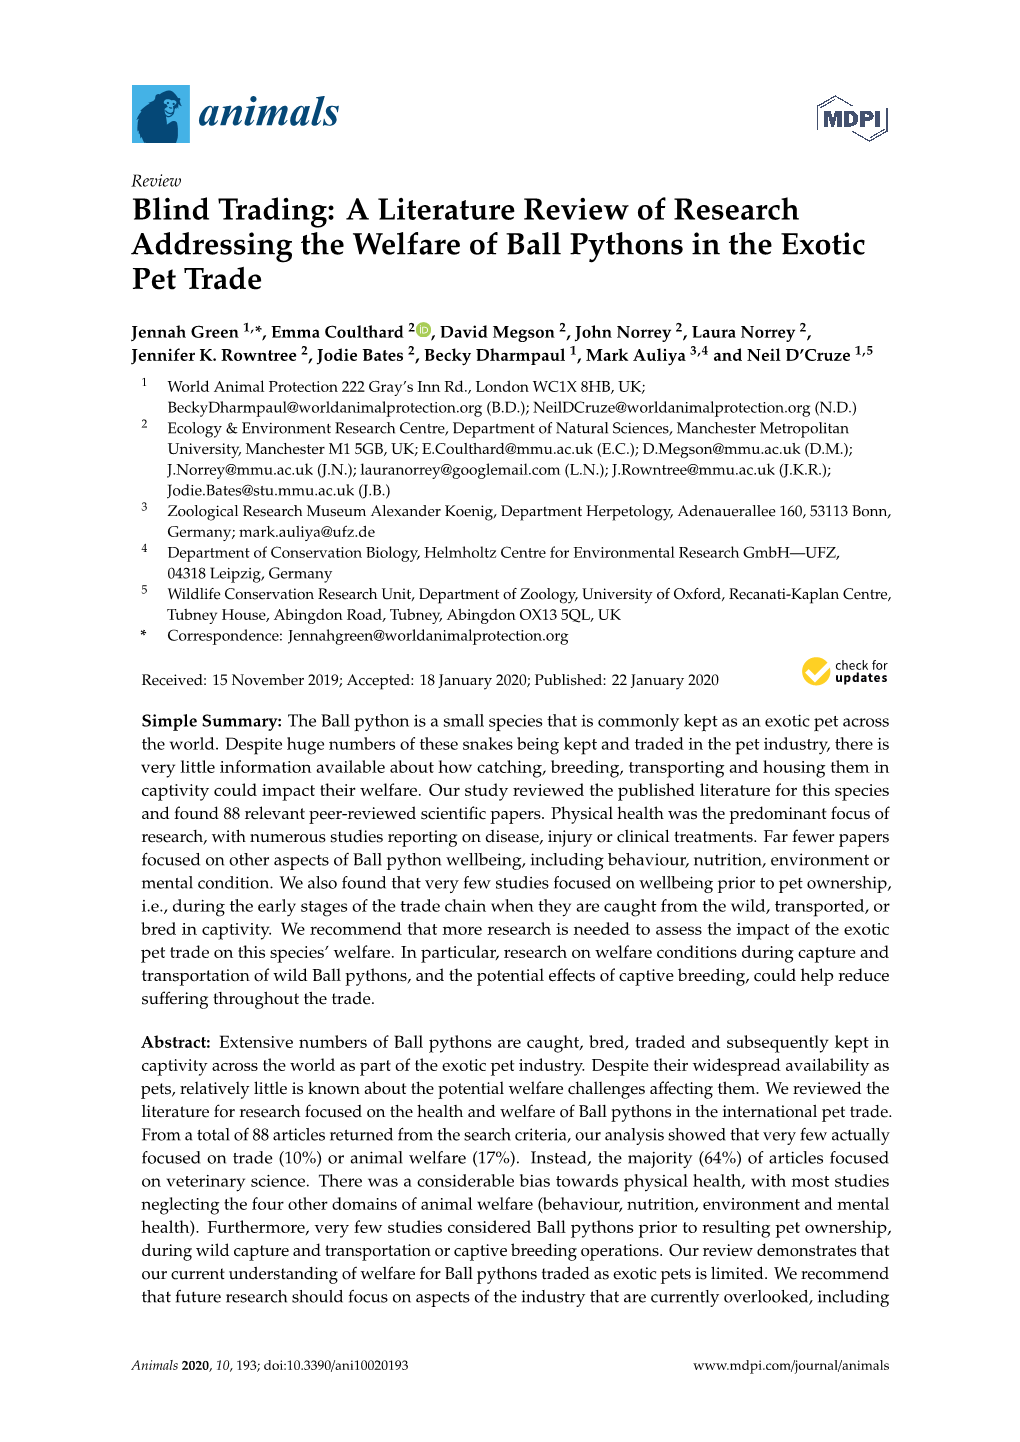 Blind Trading: a Literature Review of Research Addressing the Welfare of Ball Pythons in the Exotic Pet Trade